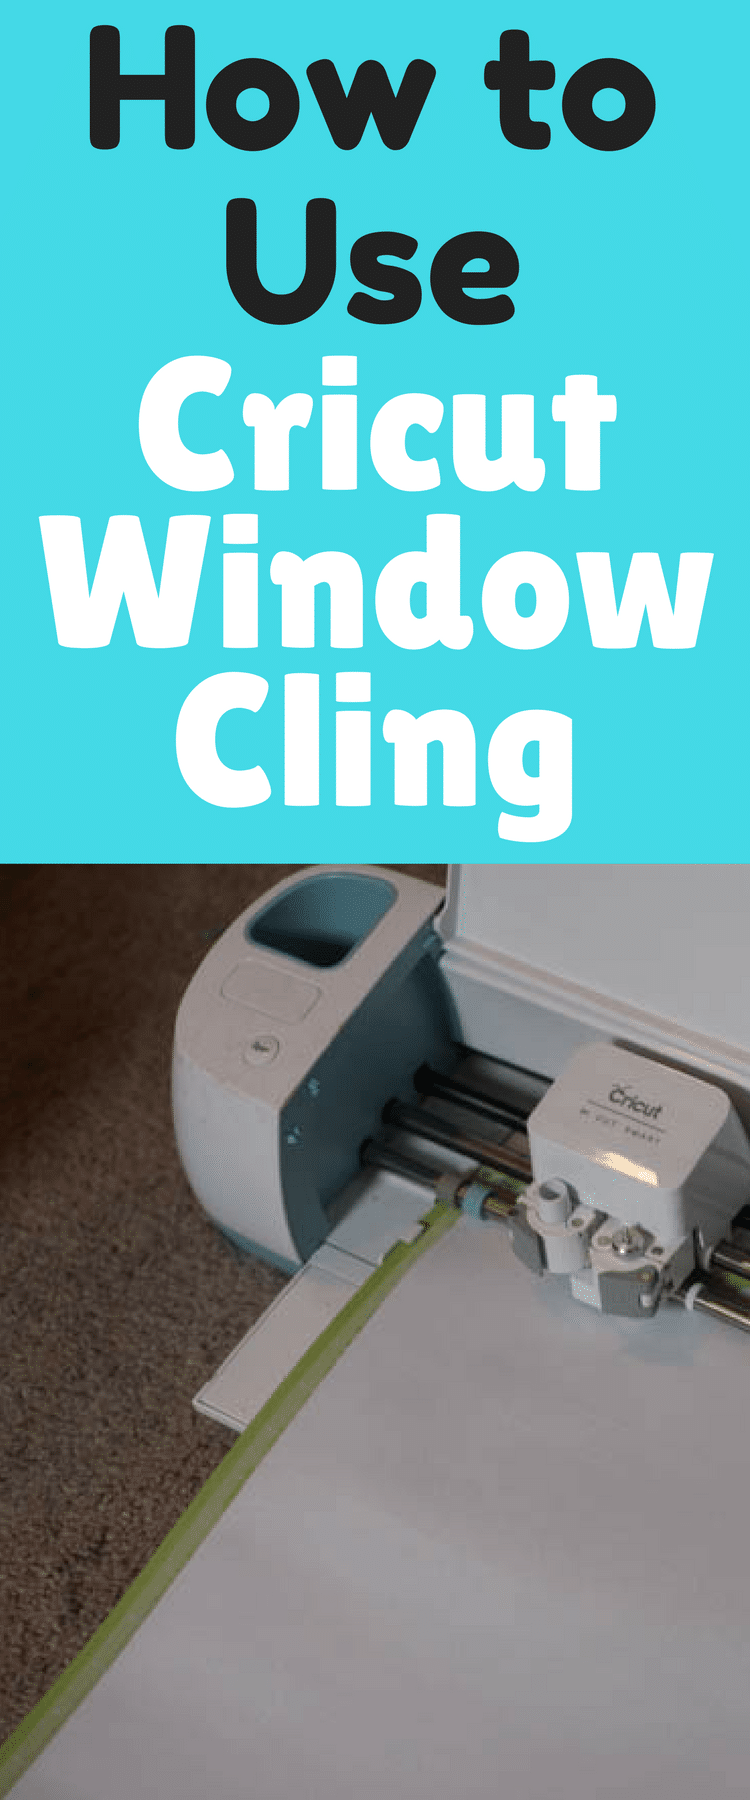 Tips and Tricks for Working with Window Cling on a Cricut - The